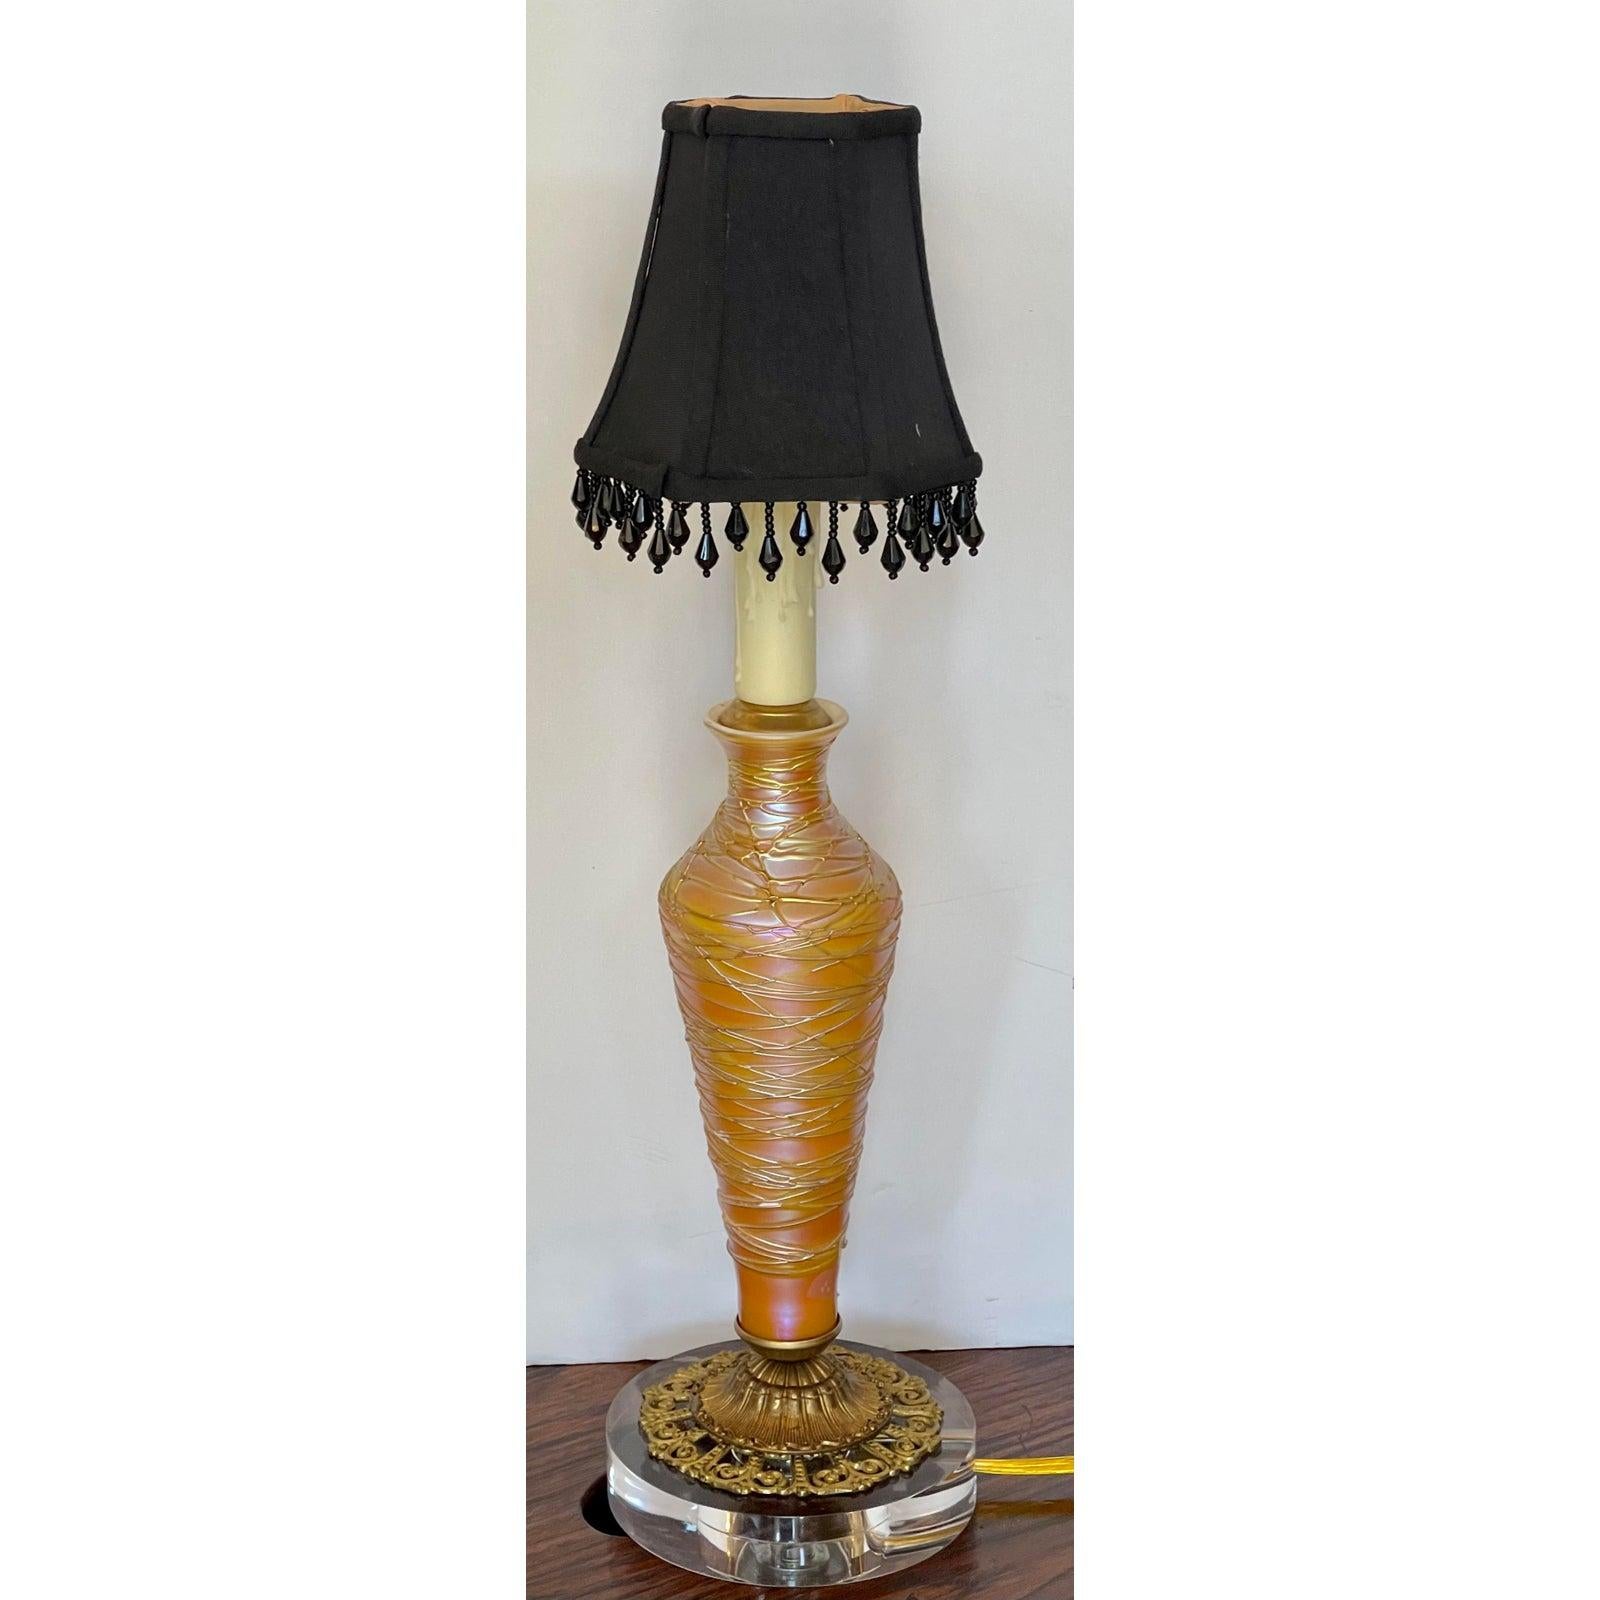 Antique Modernized Durand Threaded Glass Table Lamp

Additional information:
Materials: Glass
Color: Orange
Brand: Durand
Designer: Durand
Period: Early 20th Century
Styles: Art Deco, Modern
Lamp Shade: Included
Item Type: Vintage, Antique or